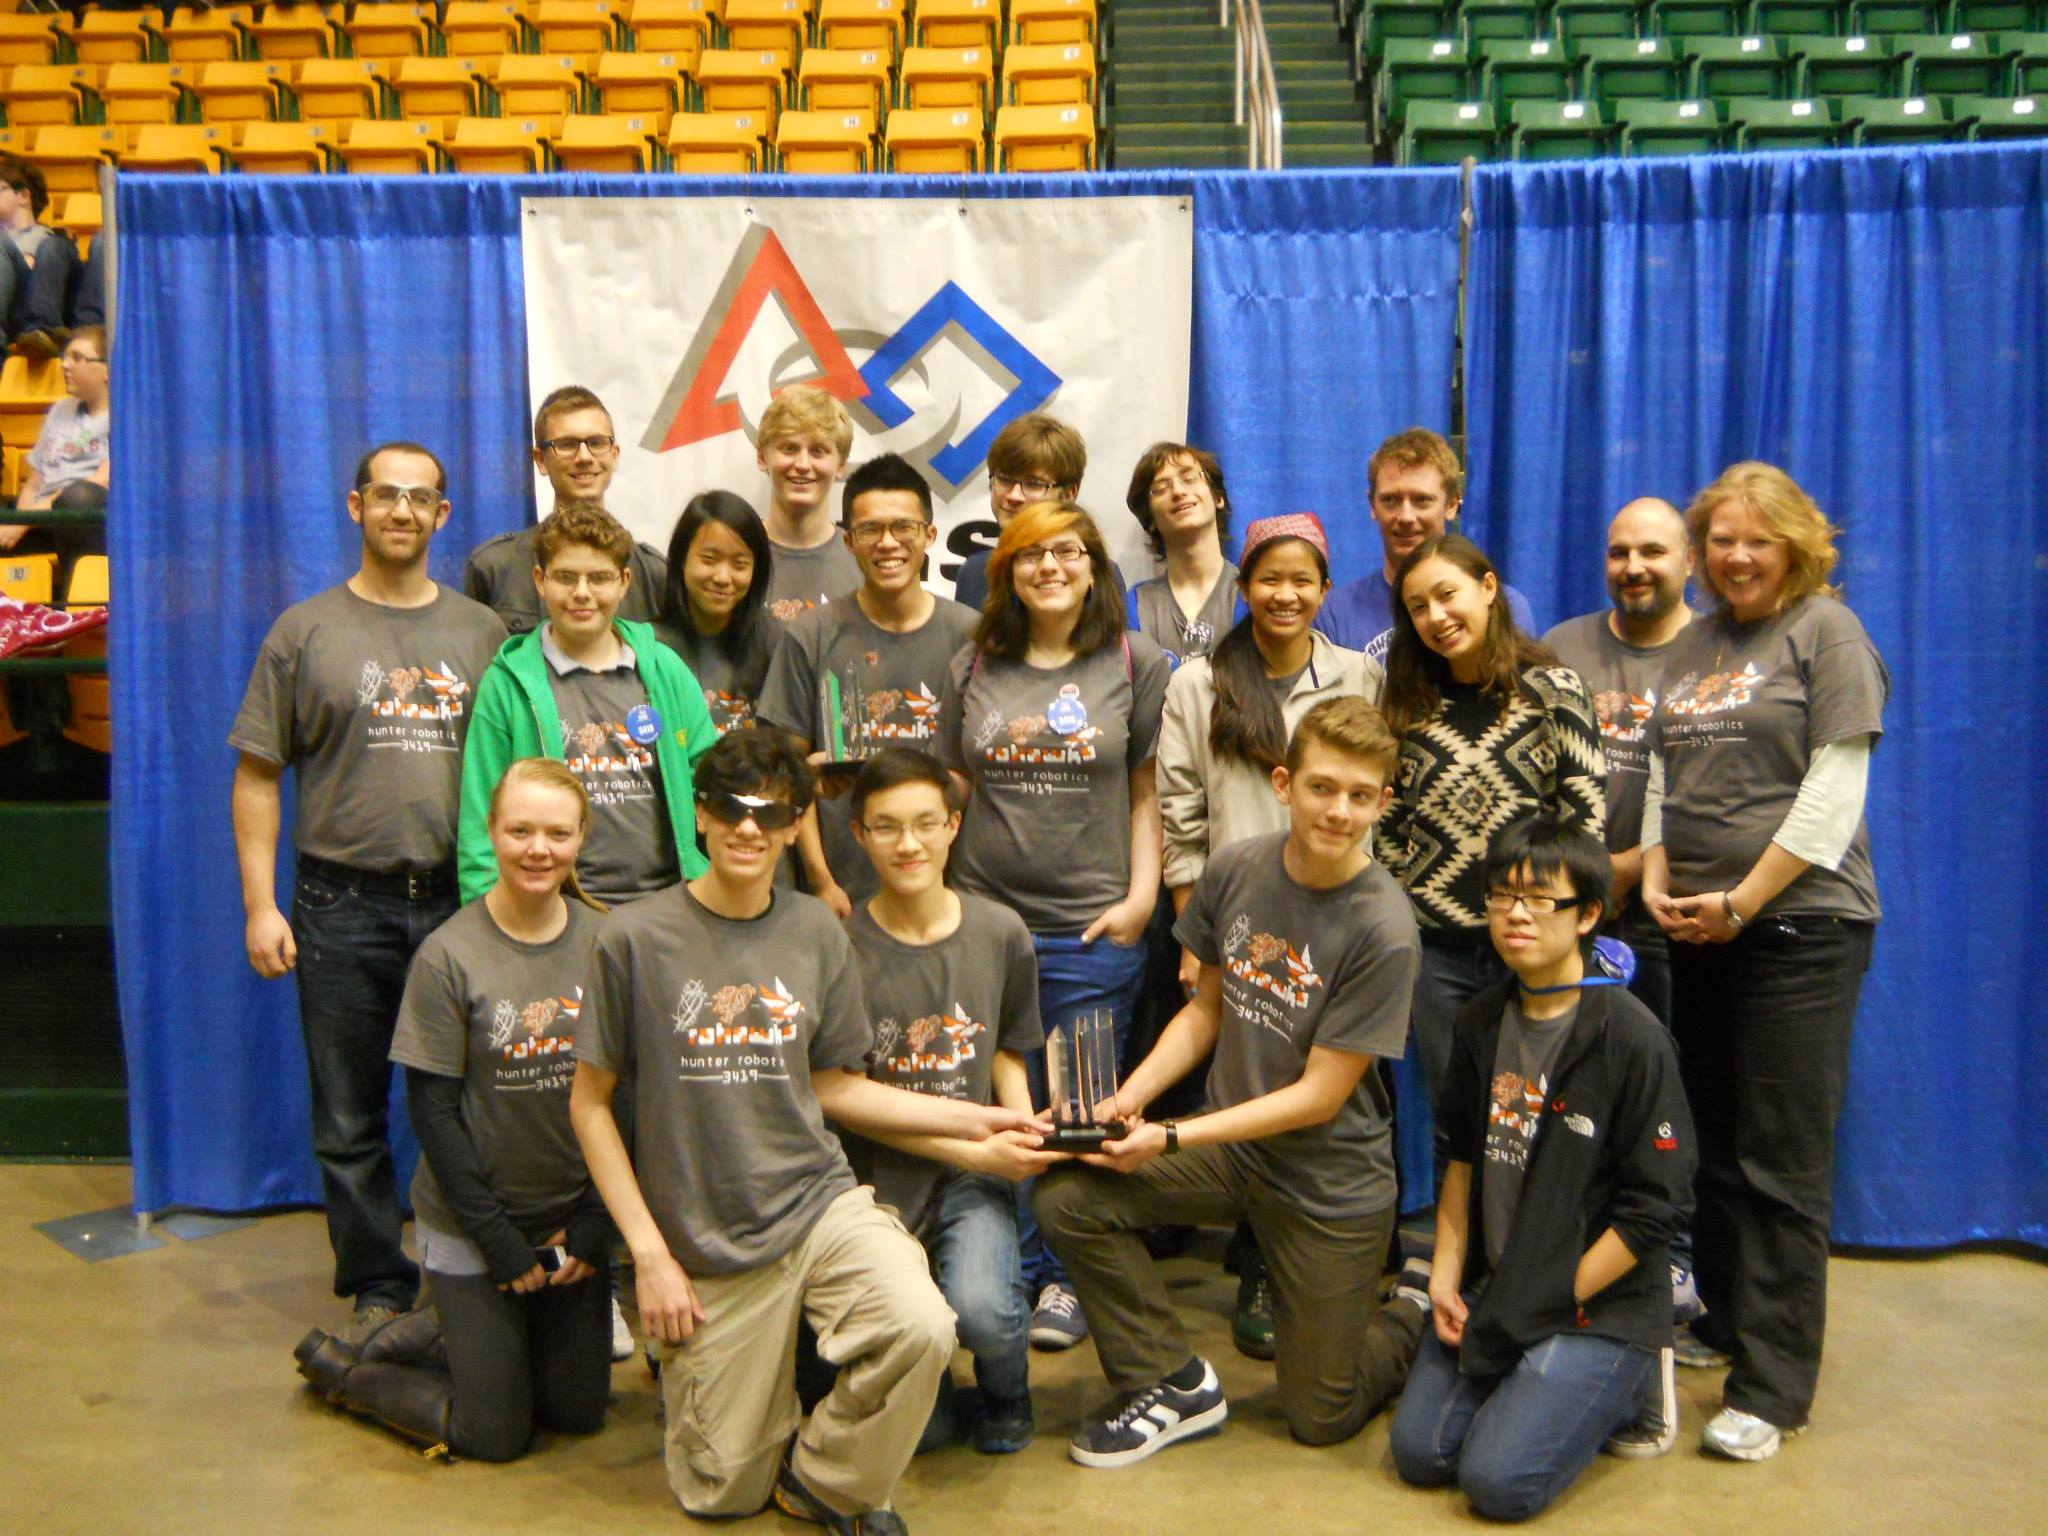 The team after winning the Excellence in Engineering Award at the Greater DC Regional